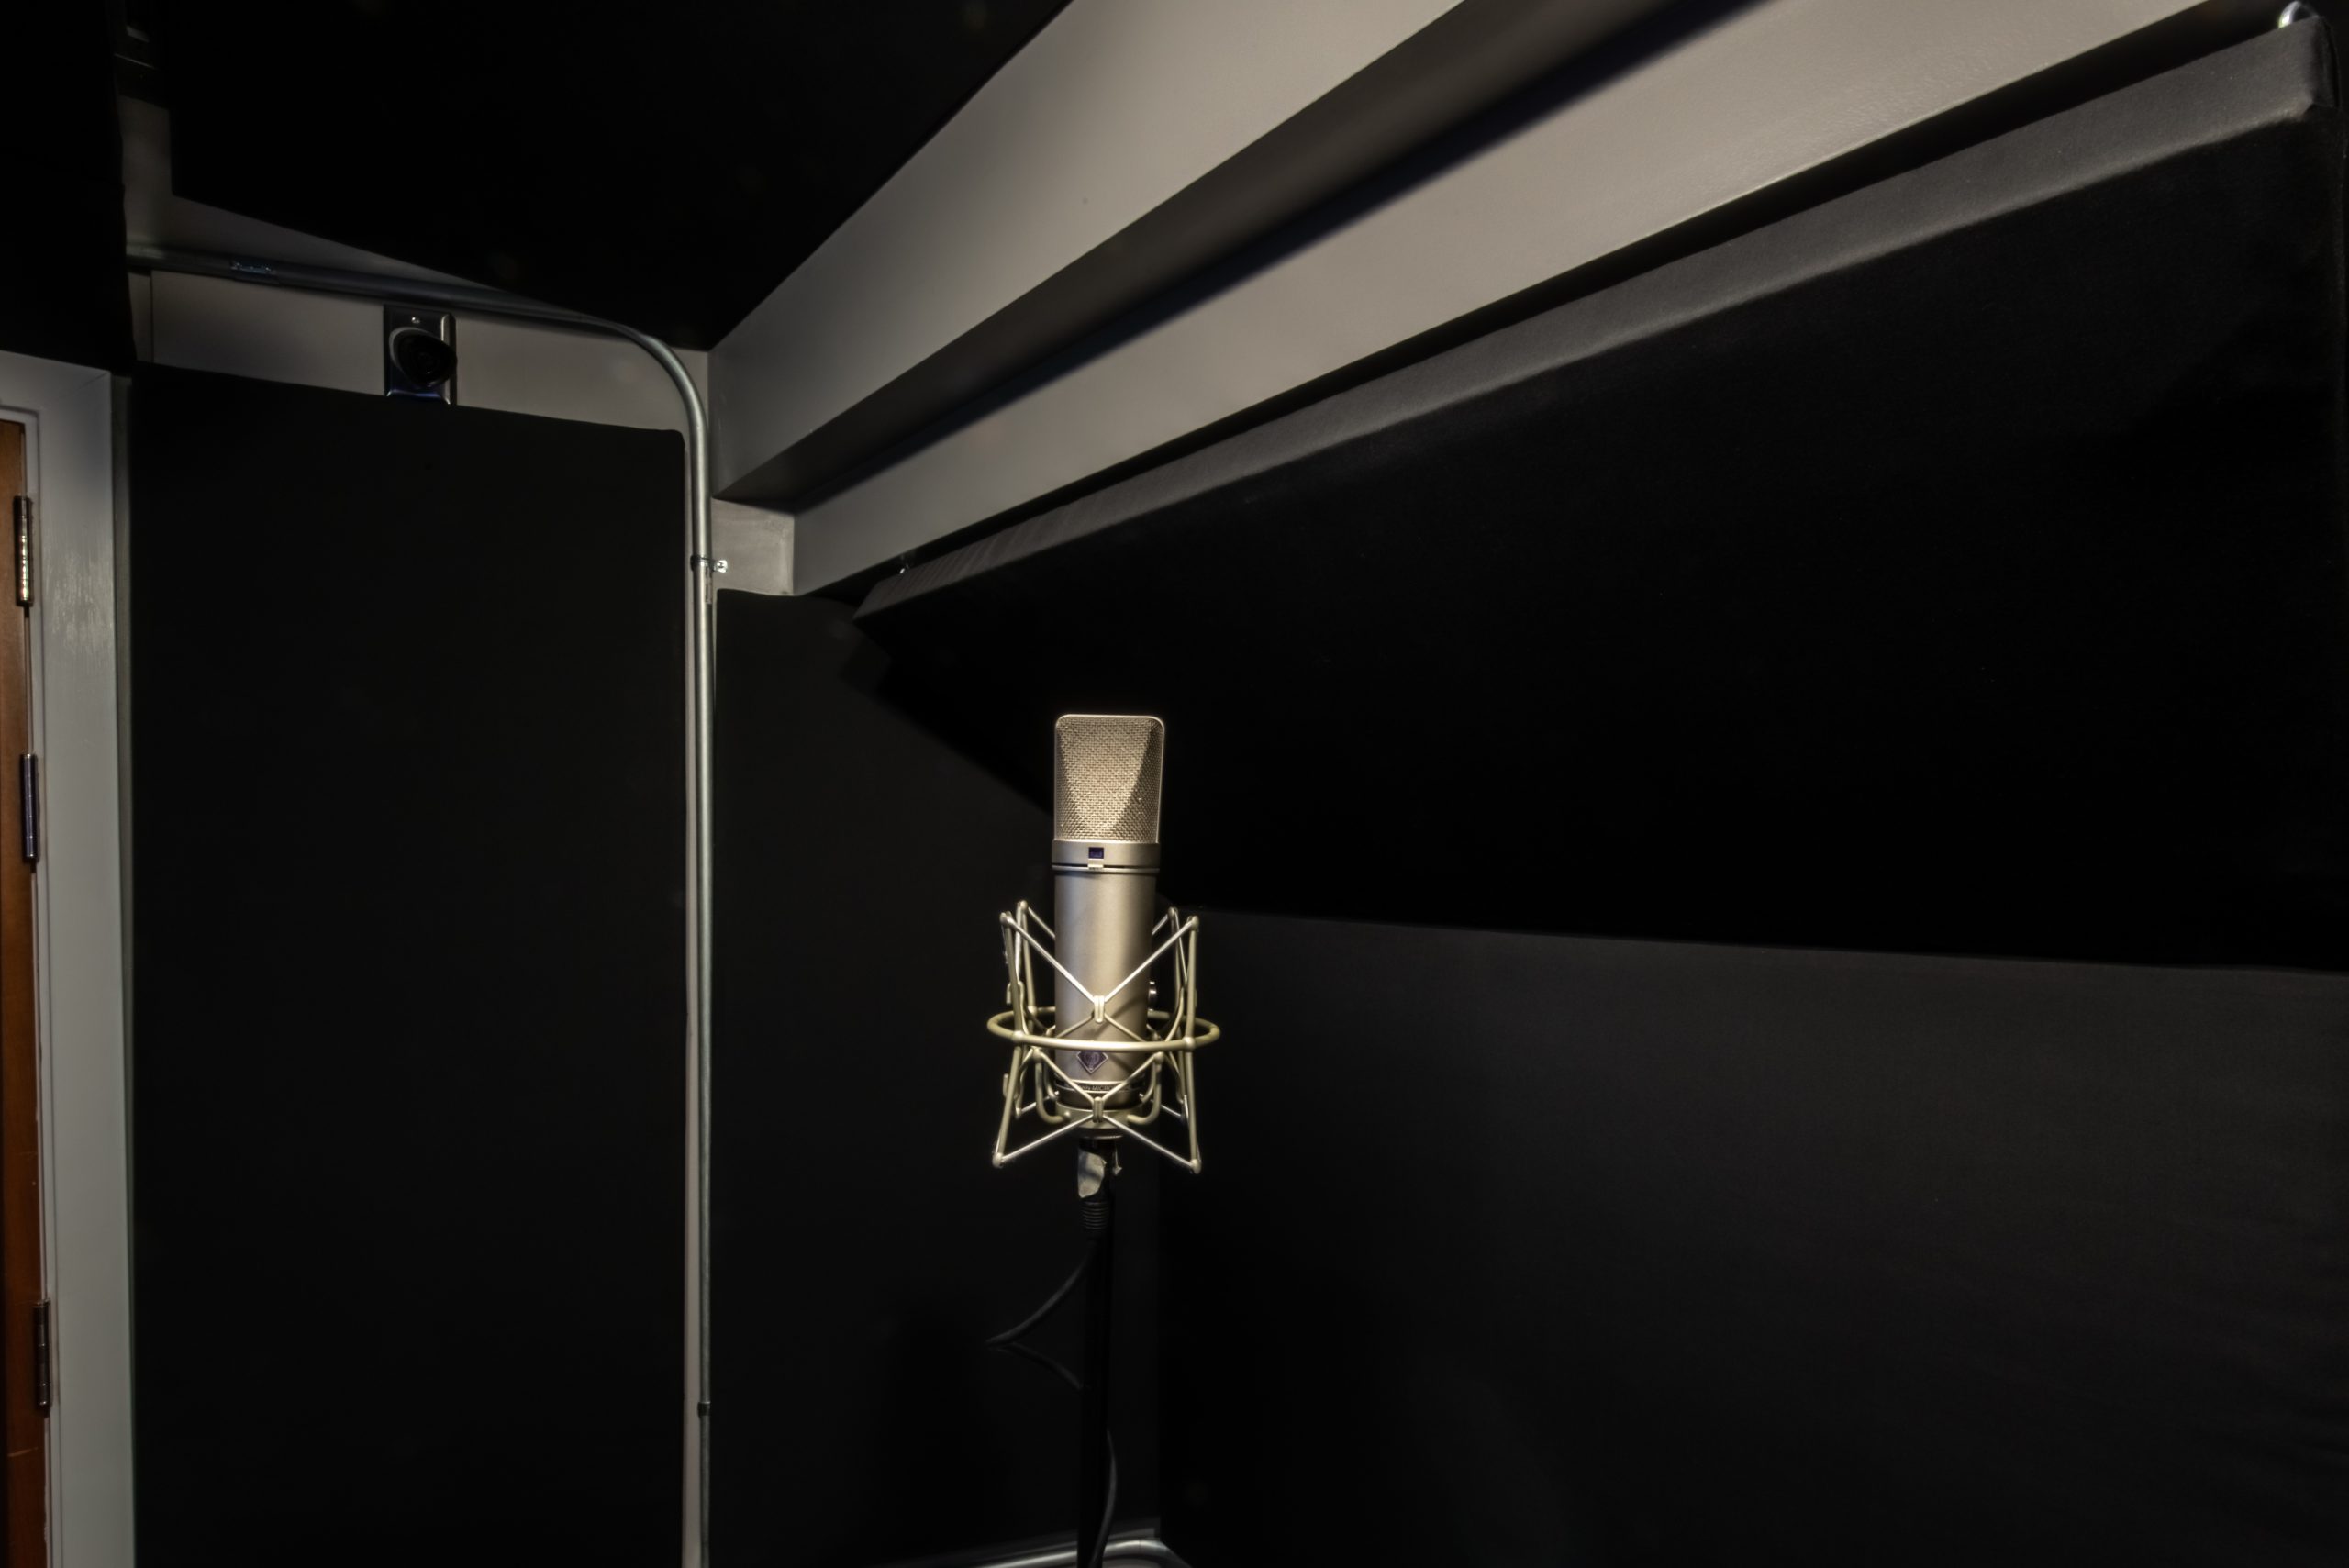 Vocal Isolation Booth